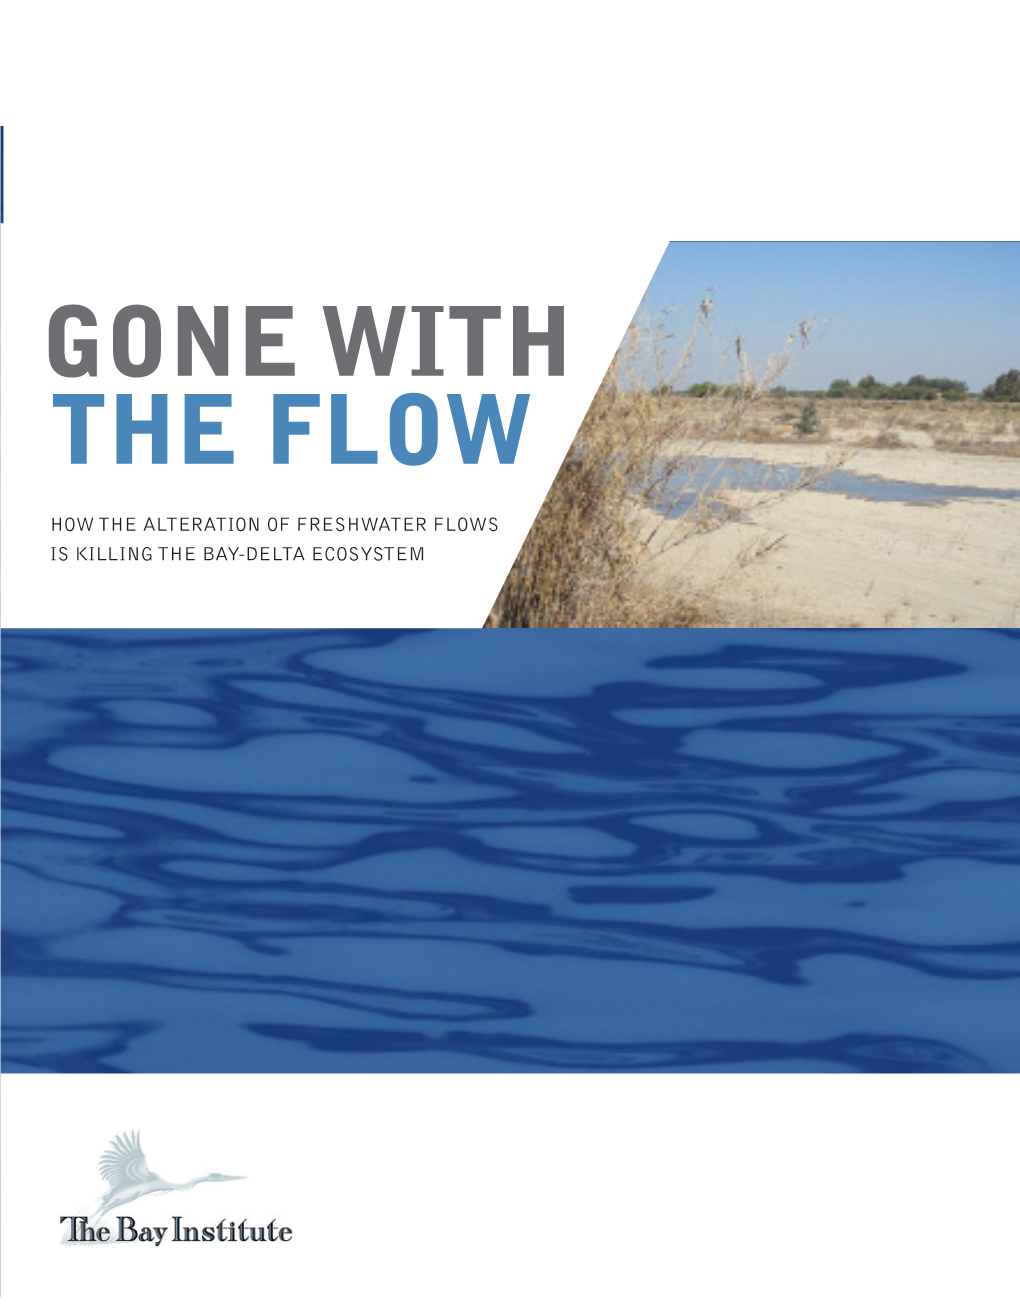 Gone with the Flow Was Prepared As Part of the Bay Institute’S Ecological Scorecard Project, Which Seeks to Measure the State of the Ecosystem’S Health and Management